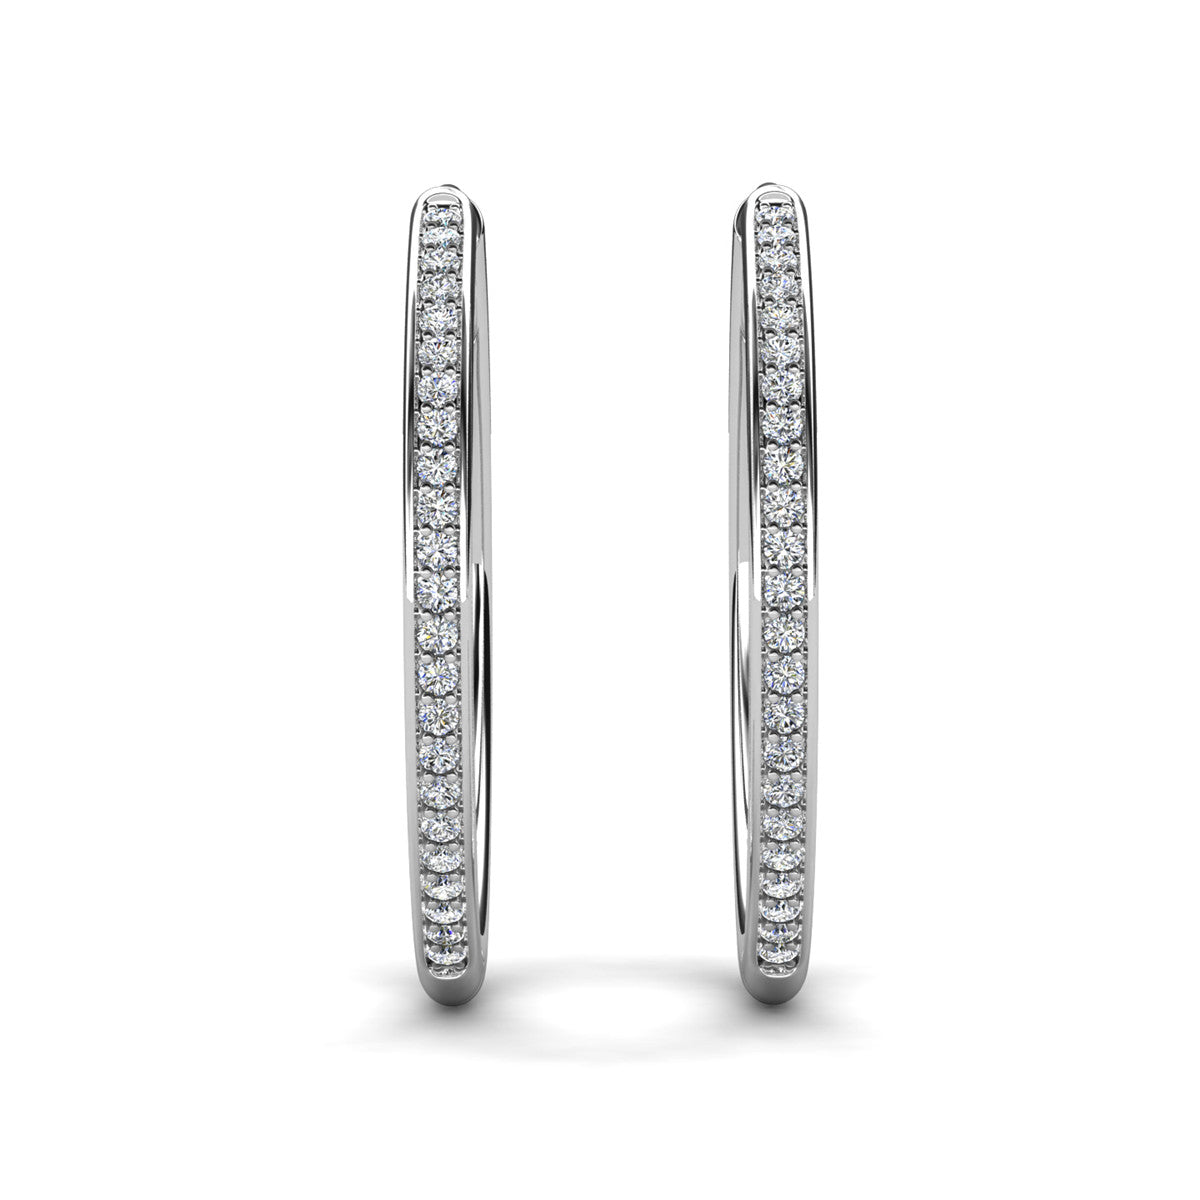 Moissanite by Cate & Chloe Delaney Sterling Silver Hoop Earrings with Moissanite Crystals